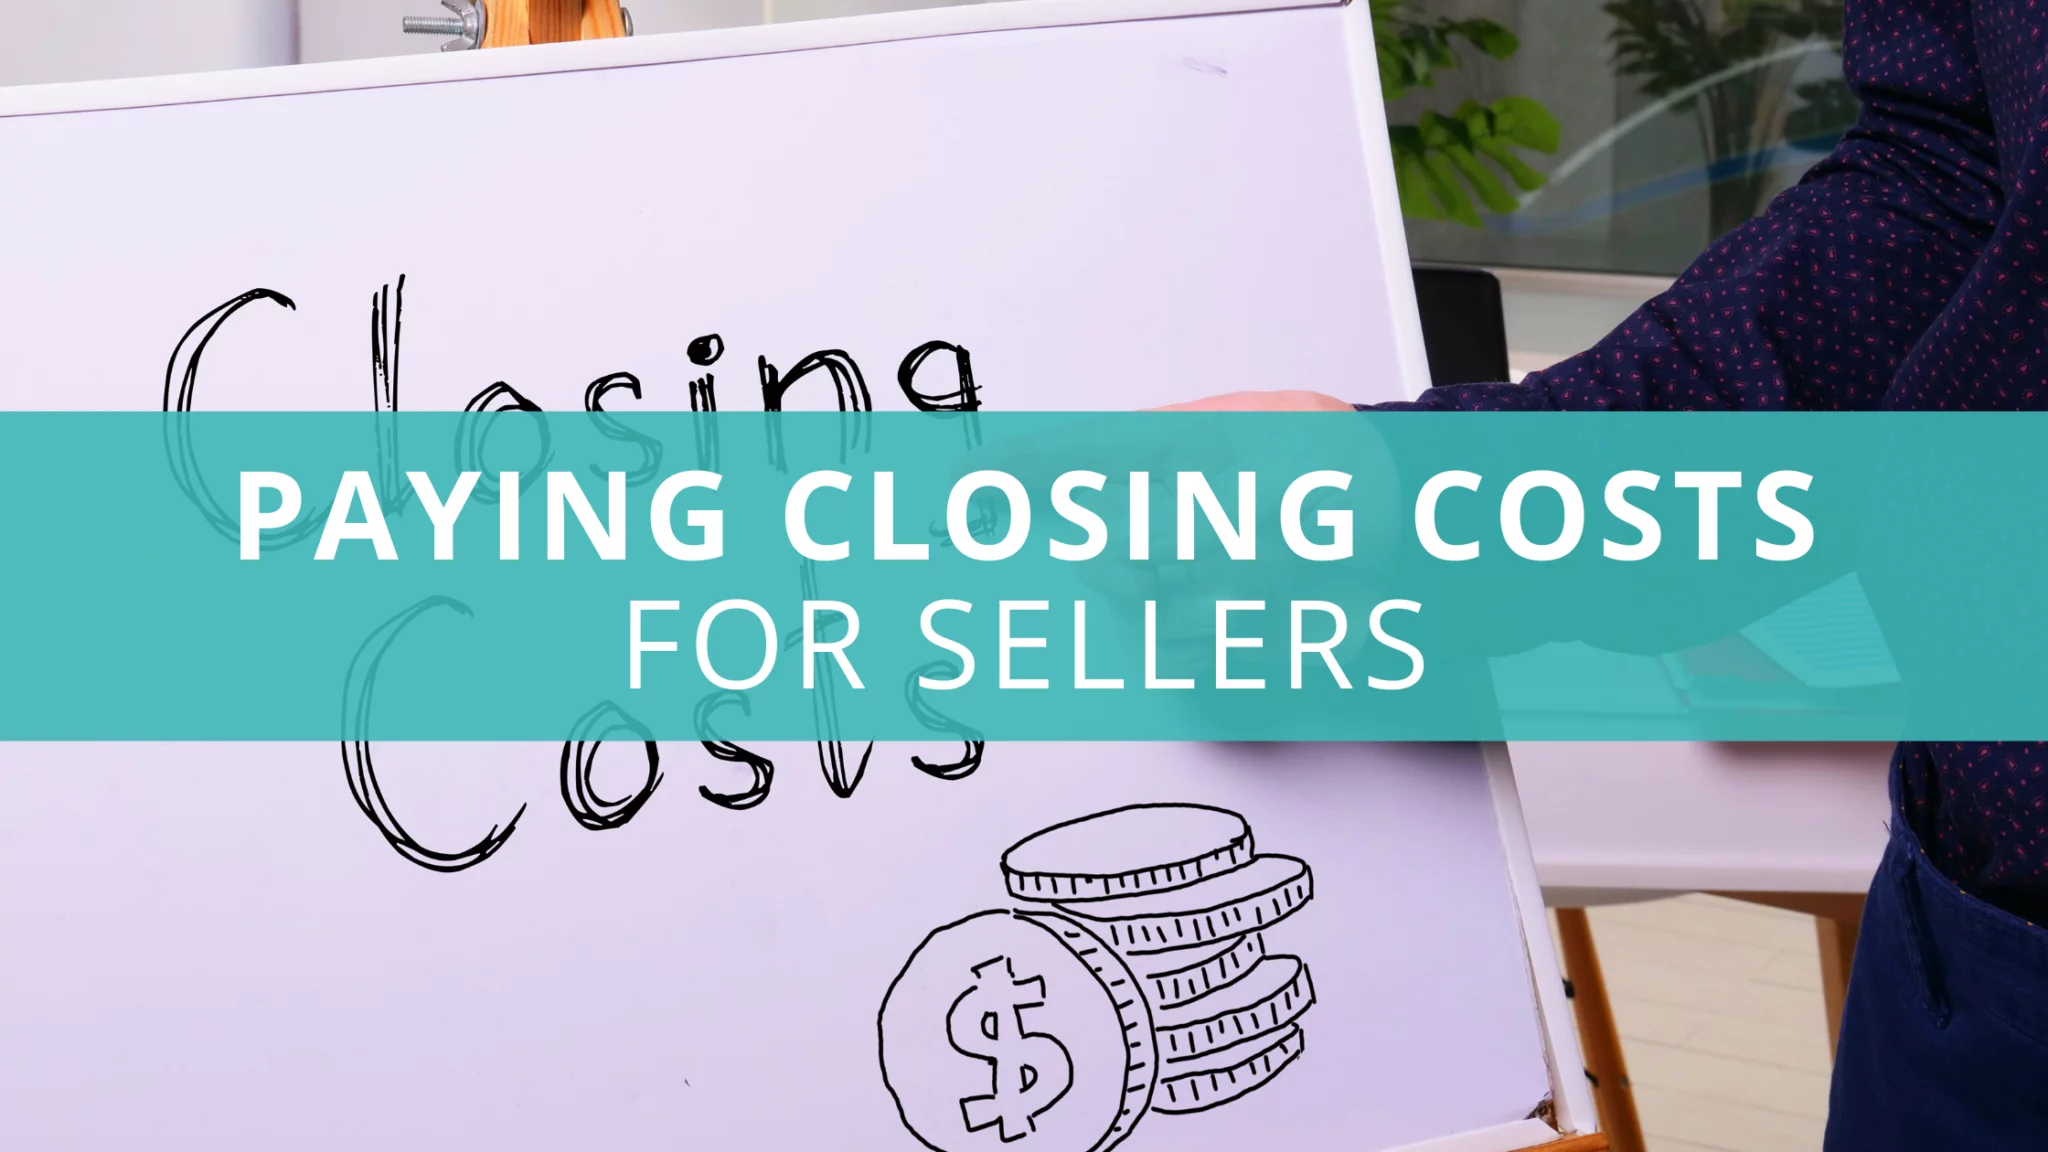 Disadvantages of a seller paying closing costs